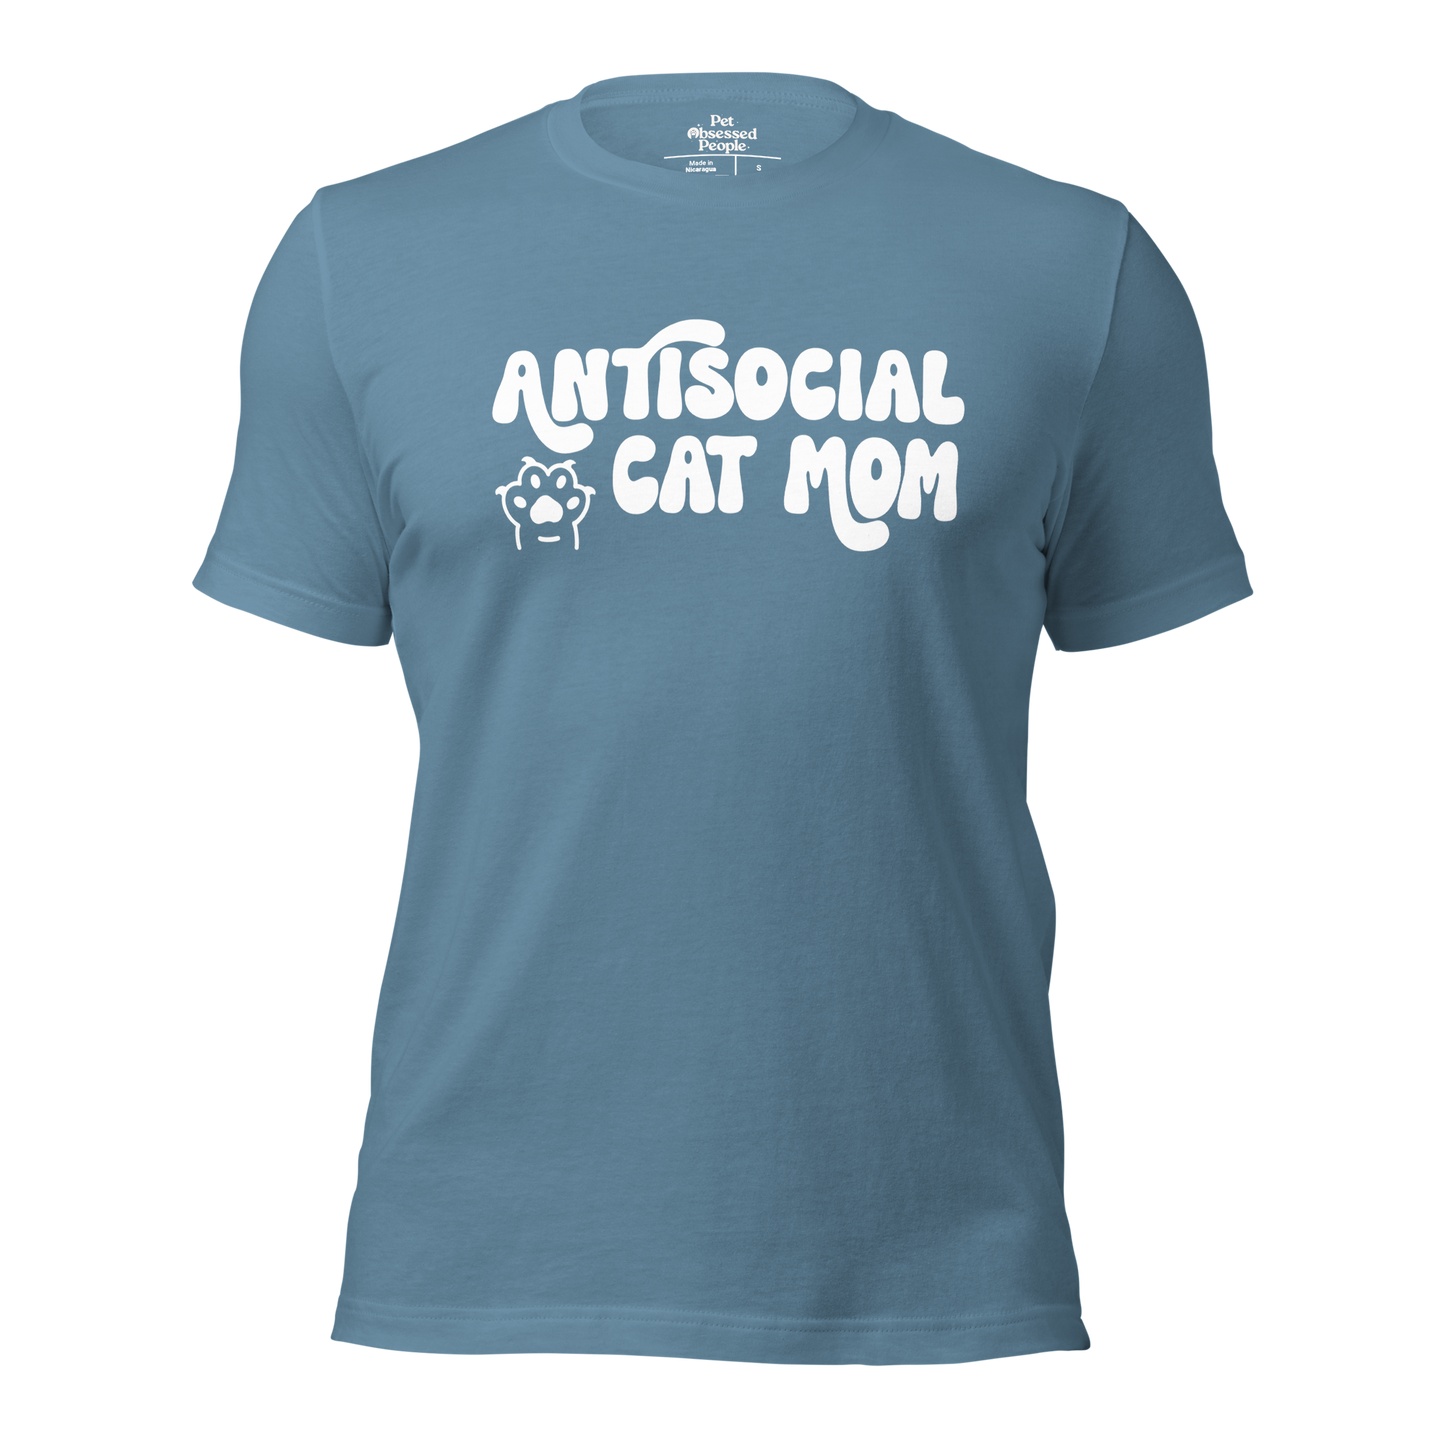 Antisocial_Cat mom_tee | Pet Obsessed People